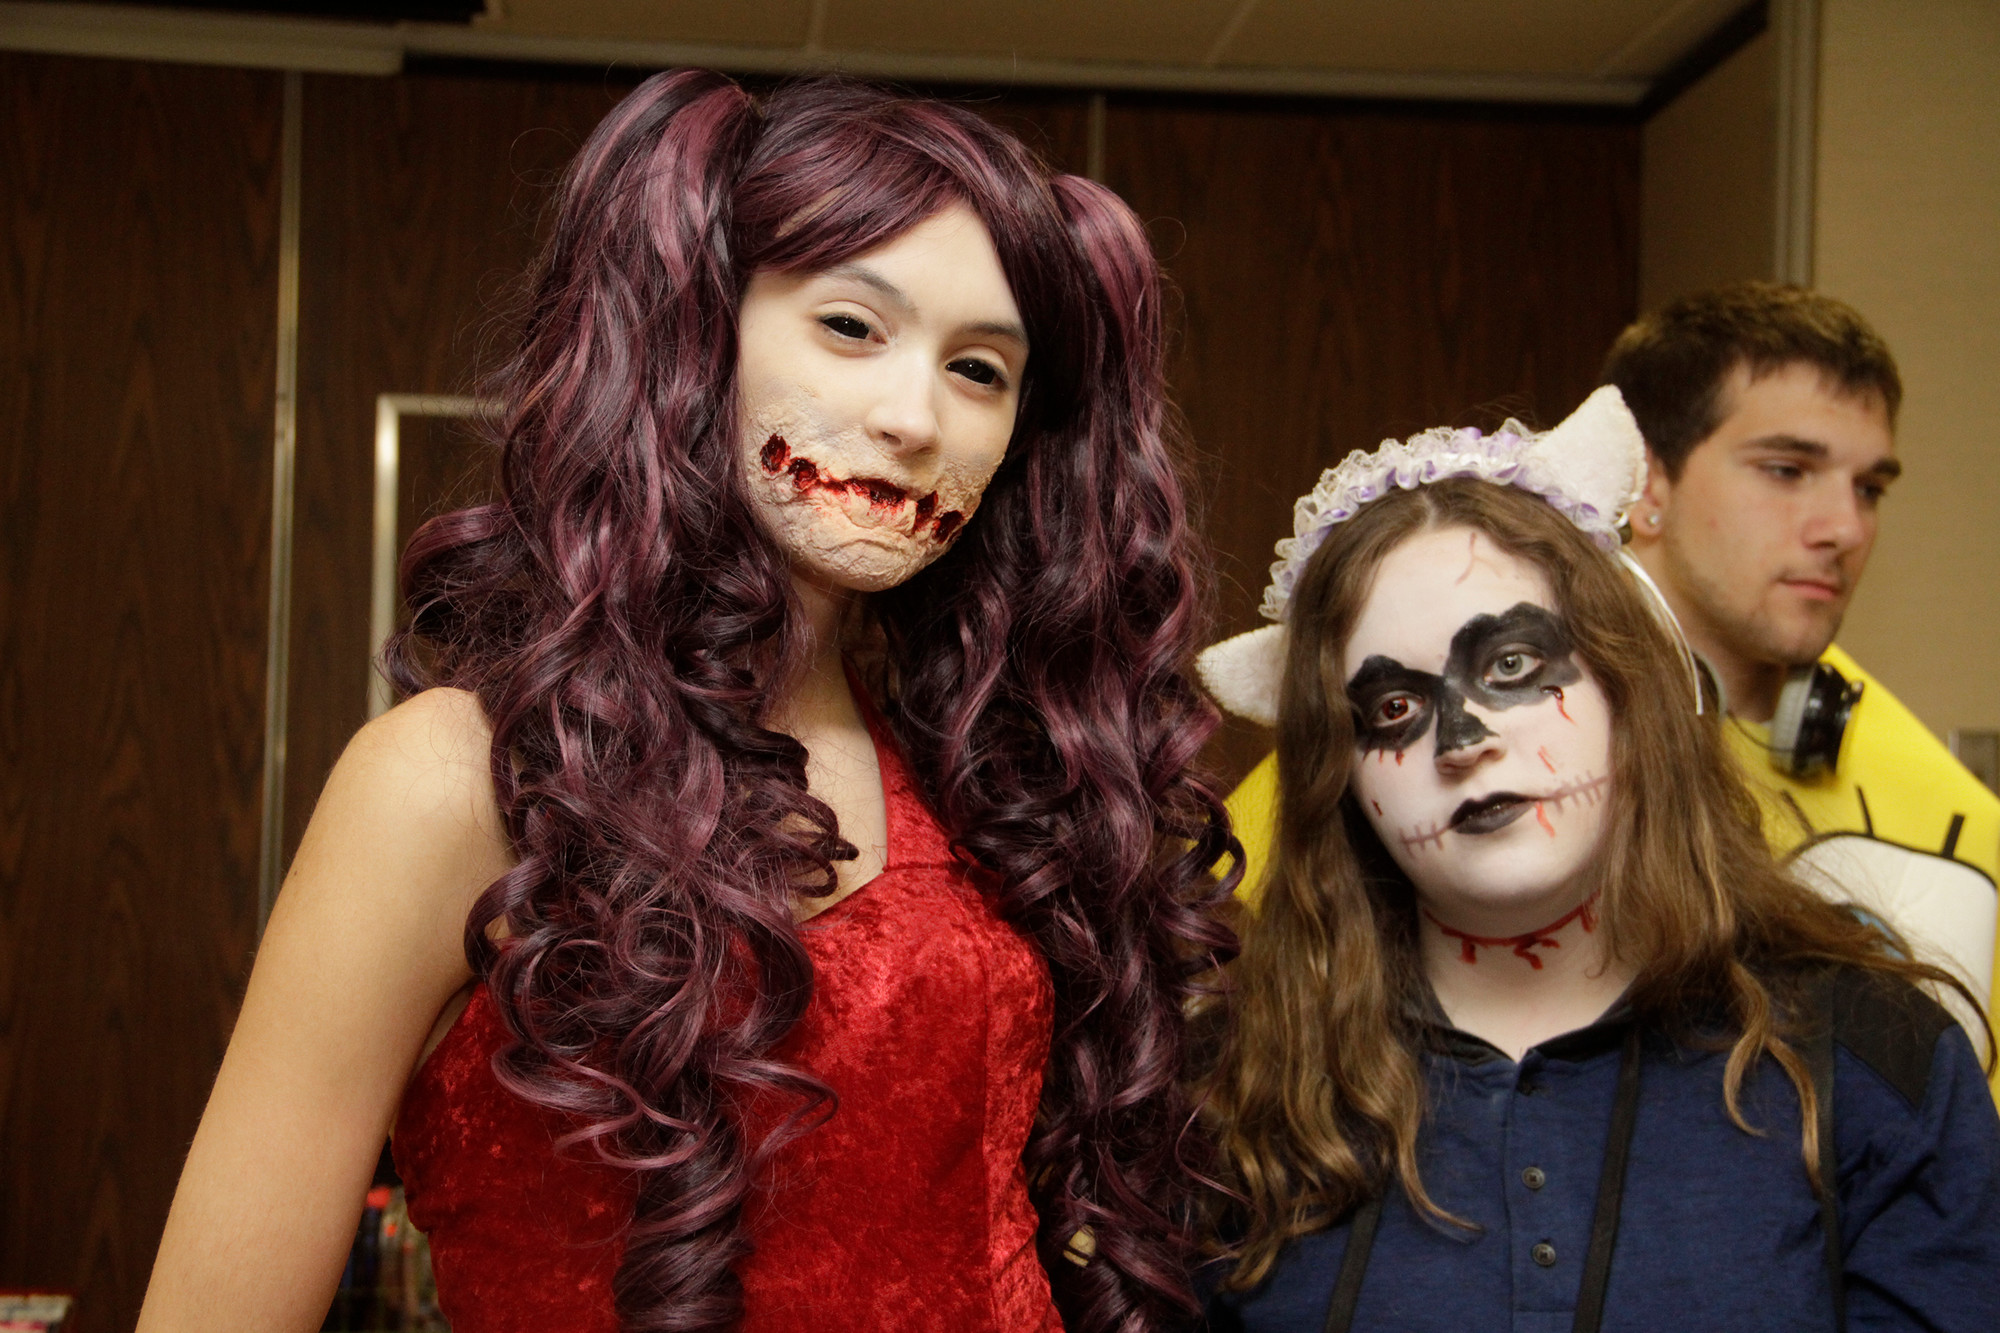 Gabrielle Eversgerd and Cassandra Russo used impressive makeup to design their Halloween guise.